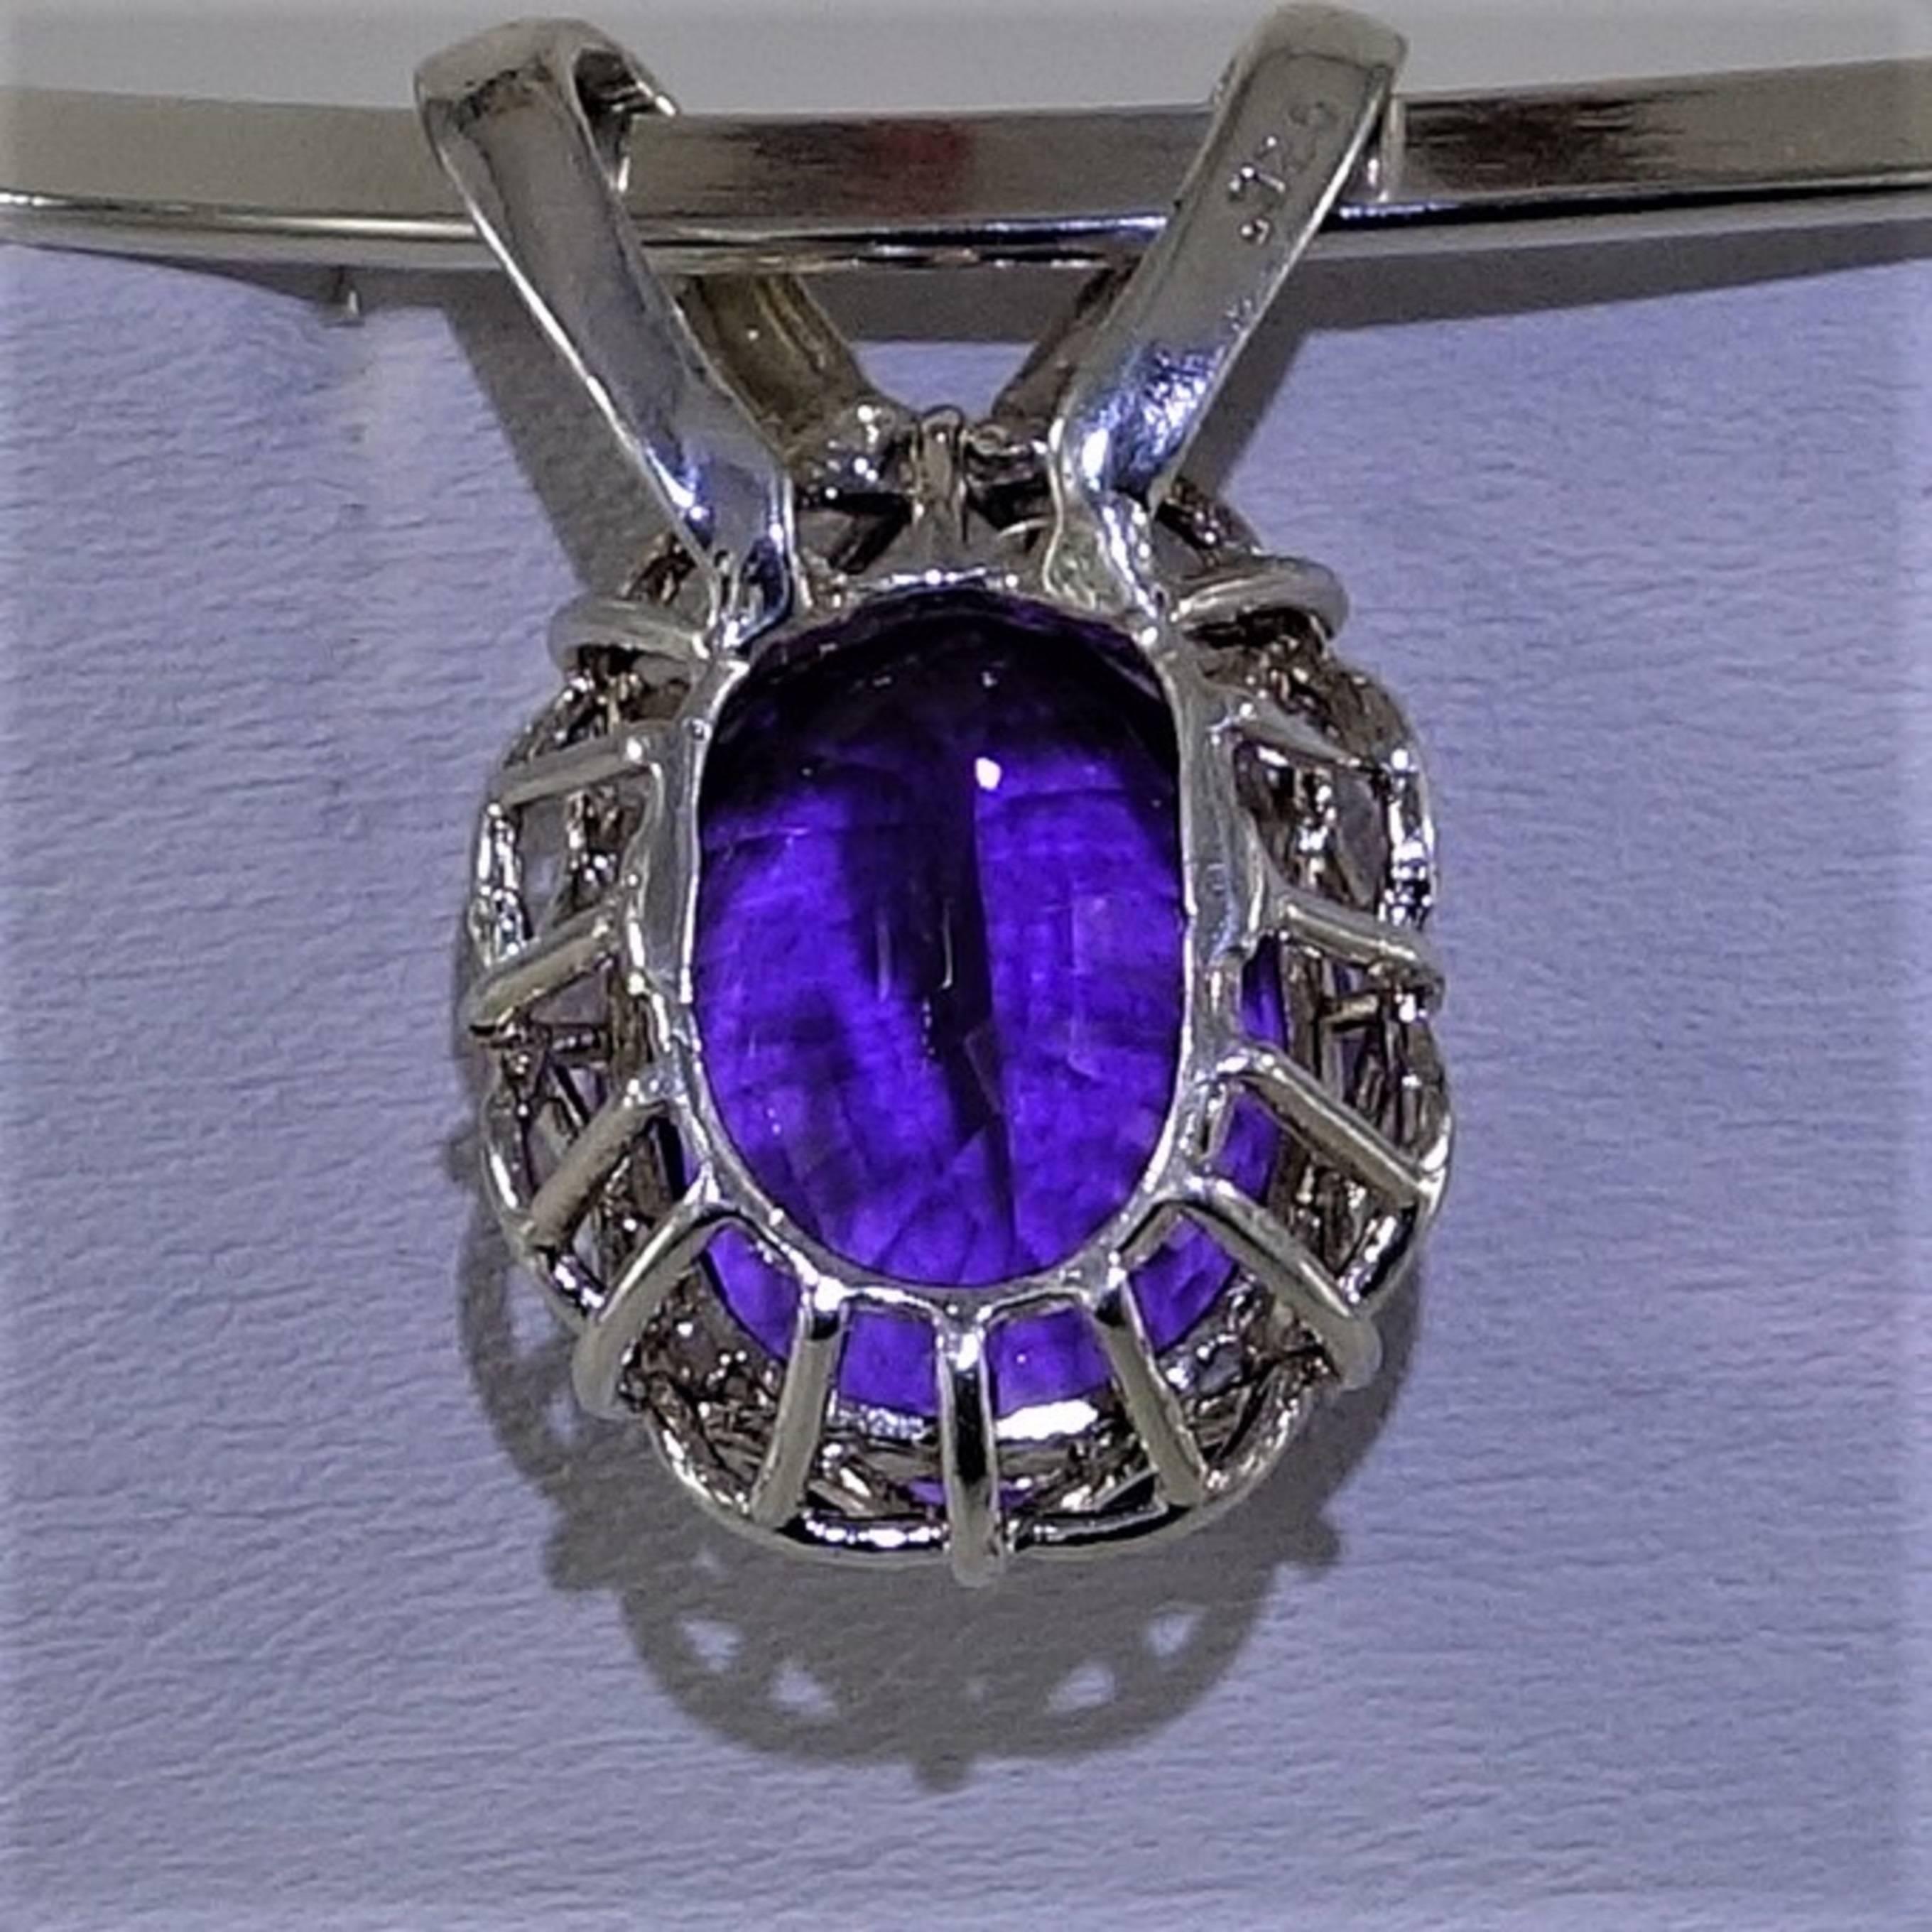 Sterling Silver Pendant with Amethyst. Sprarkling, Step cut Brazilian amethyst of 20.30 carats set in Sterling Silver. The setting has two large bails to accommadate a chain or collar.  The setting itself is a basket that raises up to marquis shapes